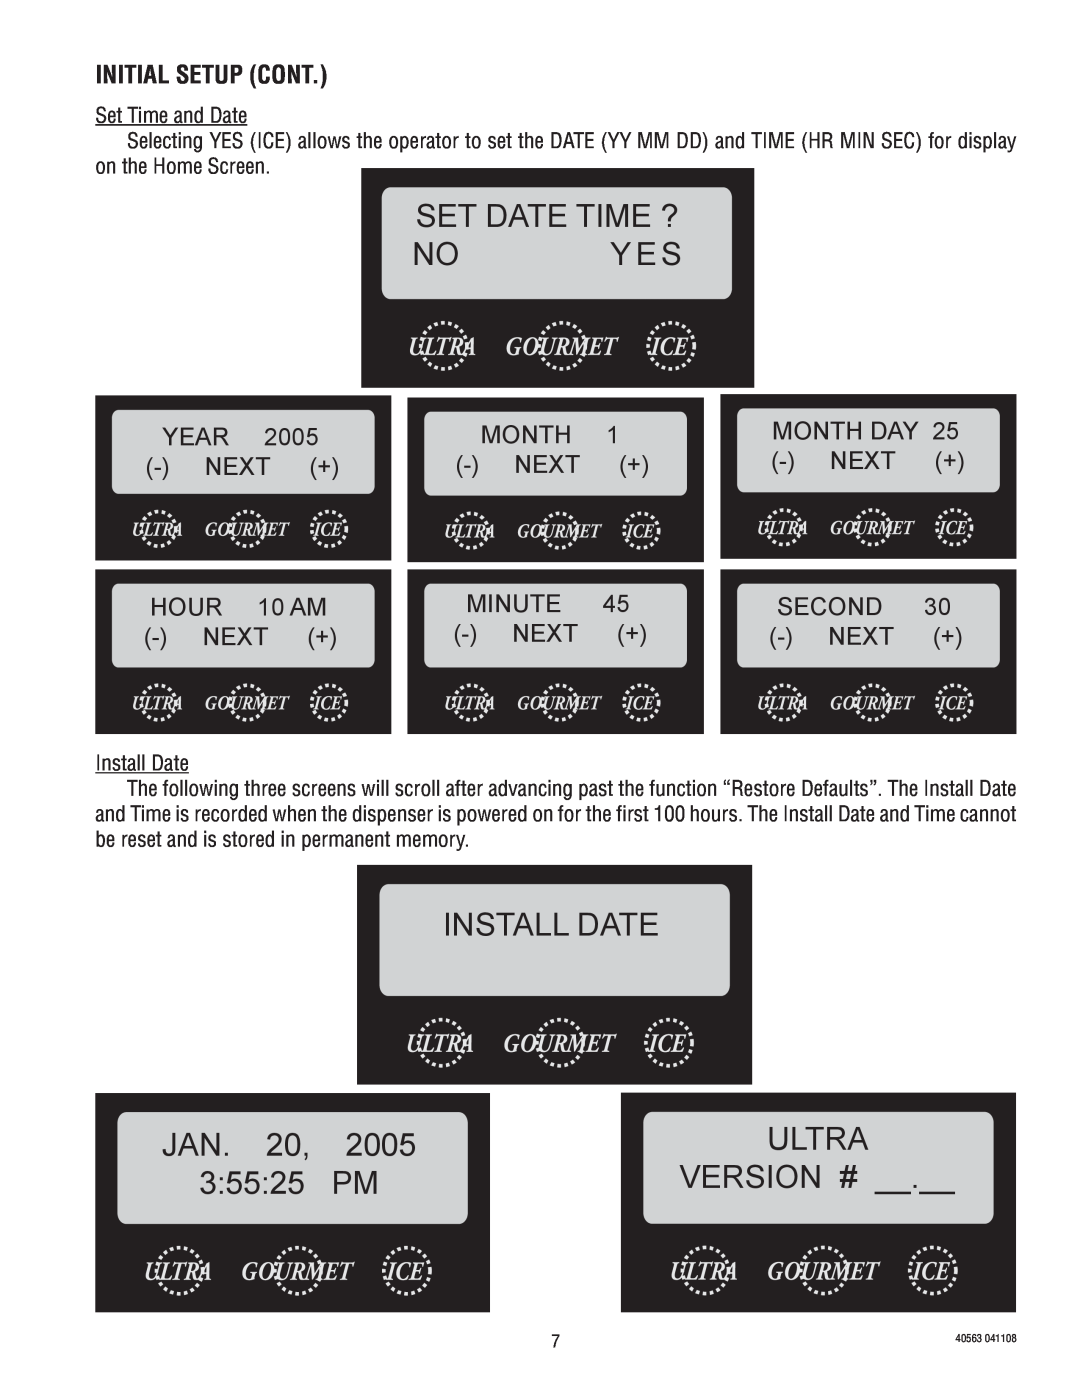 Bunn Ultra 2, ULTRA-1 service manual Set Date Time ? No Yes, Install Date, Jan, 2005, Version #, Initial setup cont 